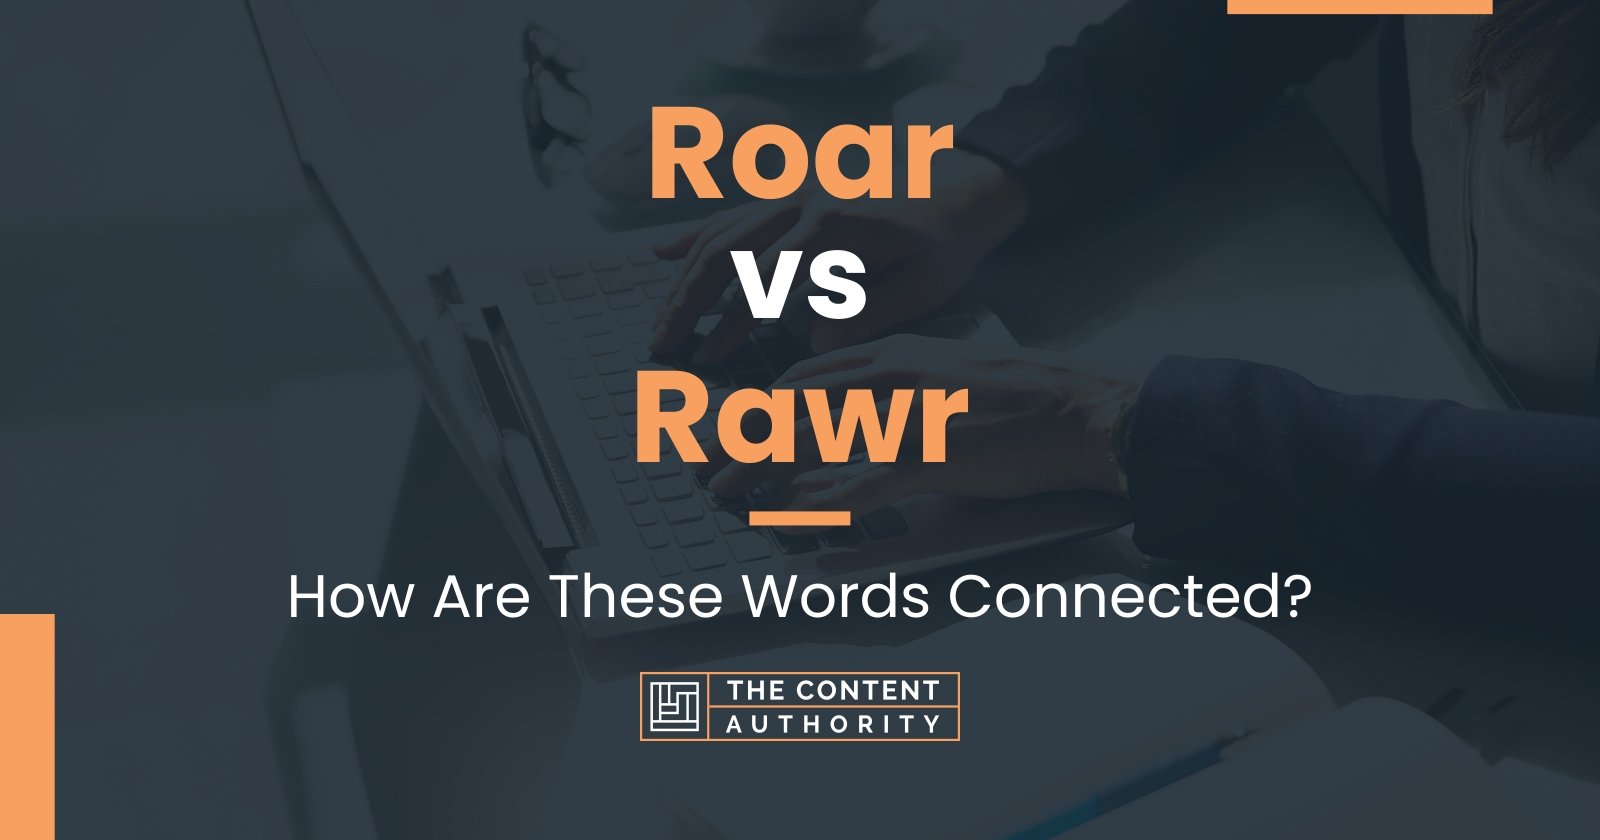 Roar vs Rawr: How Are These Words Connected?